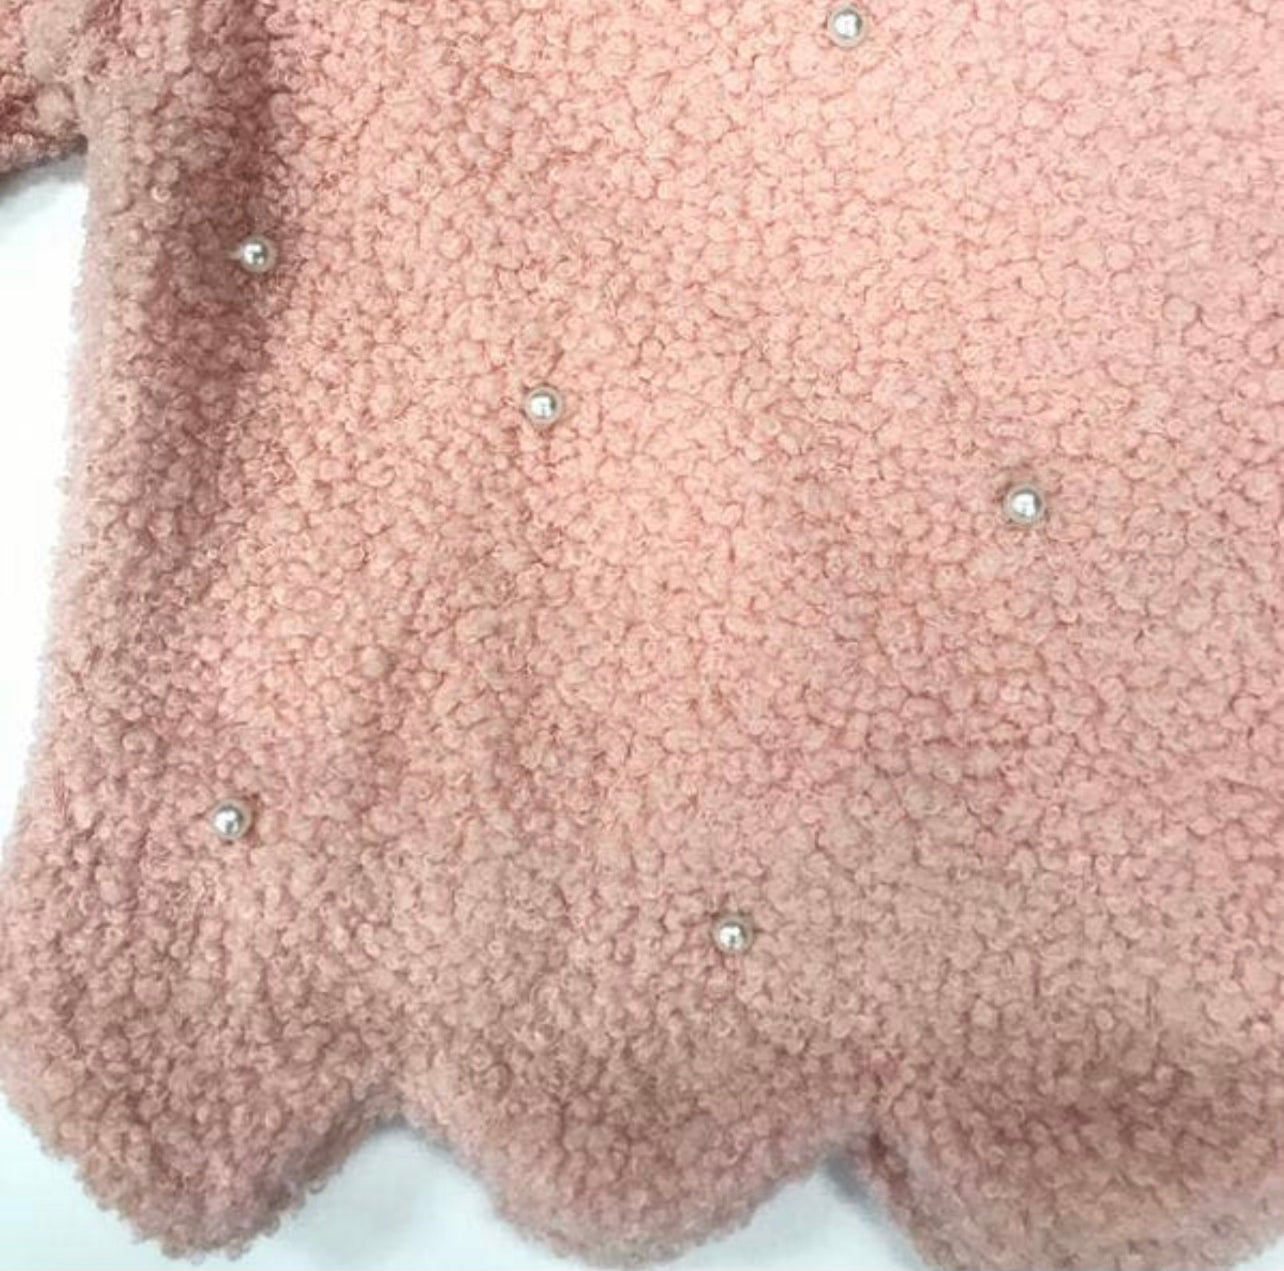 Maddie Girl - Pink Scalloped Pearl Sweater